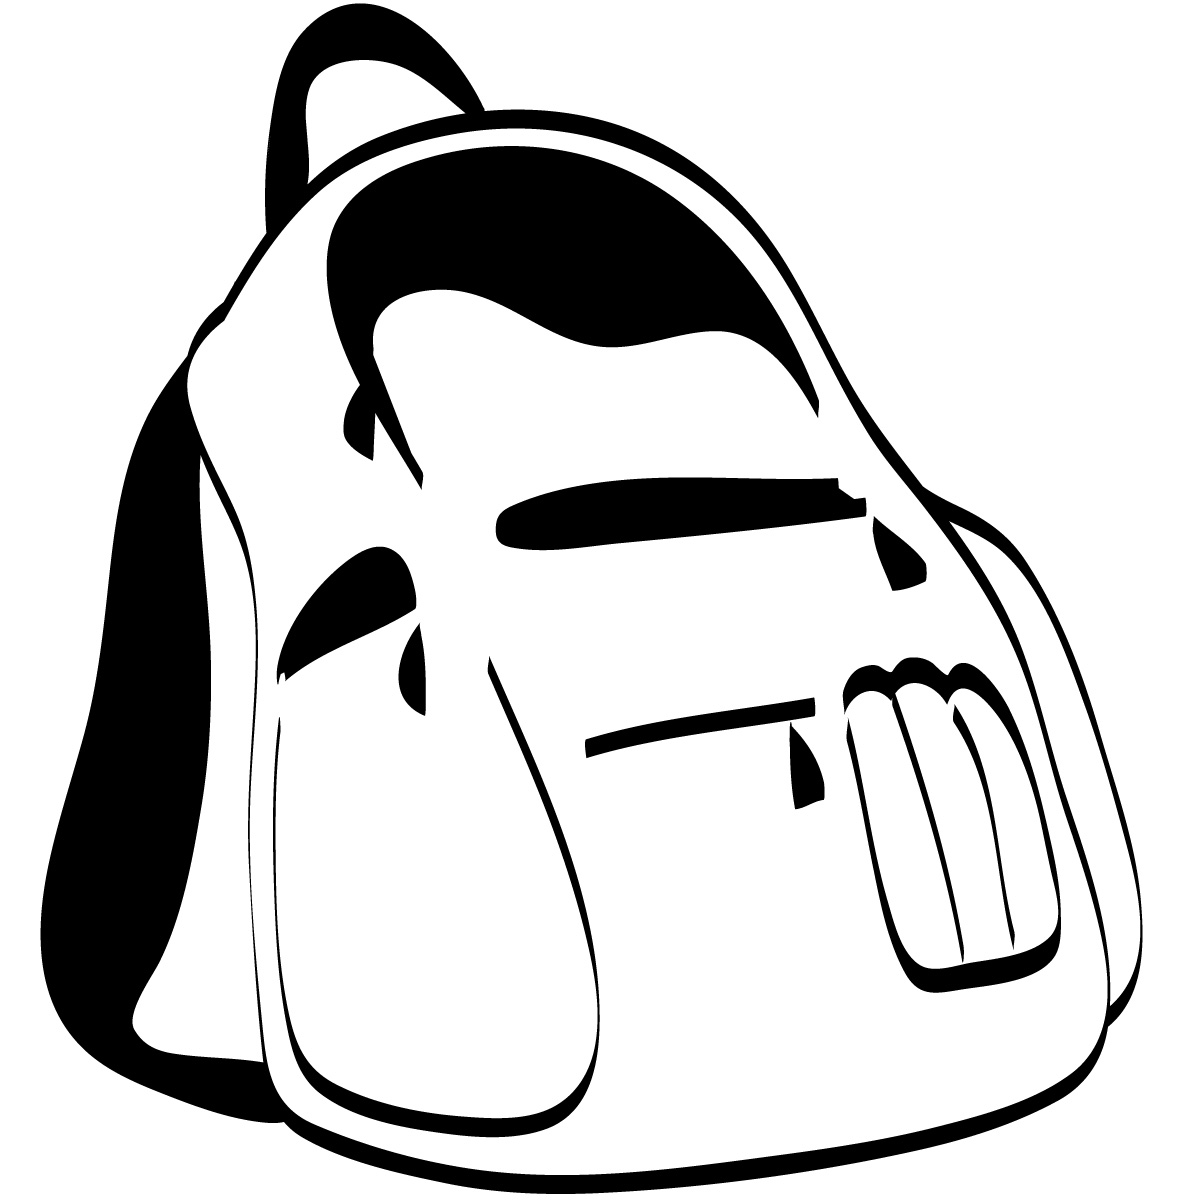 Lunch Bag Clipart | Clipart Panda - Free Clipart Images